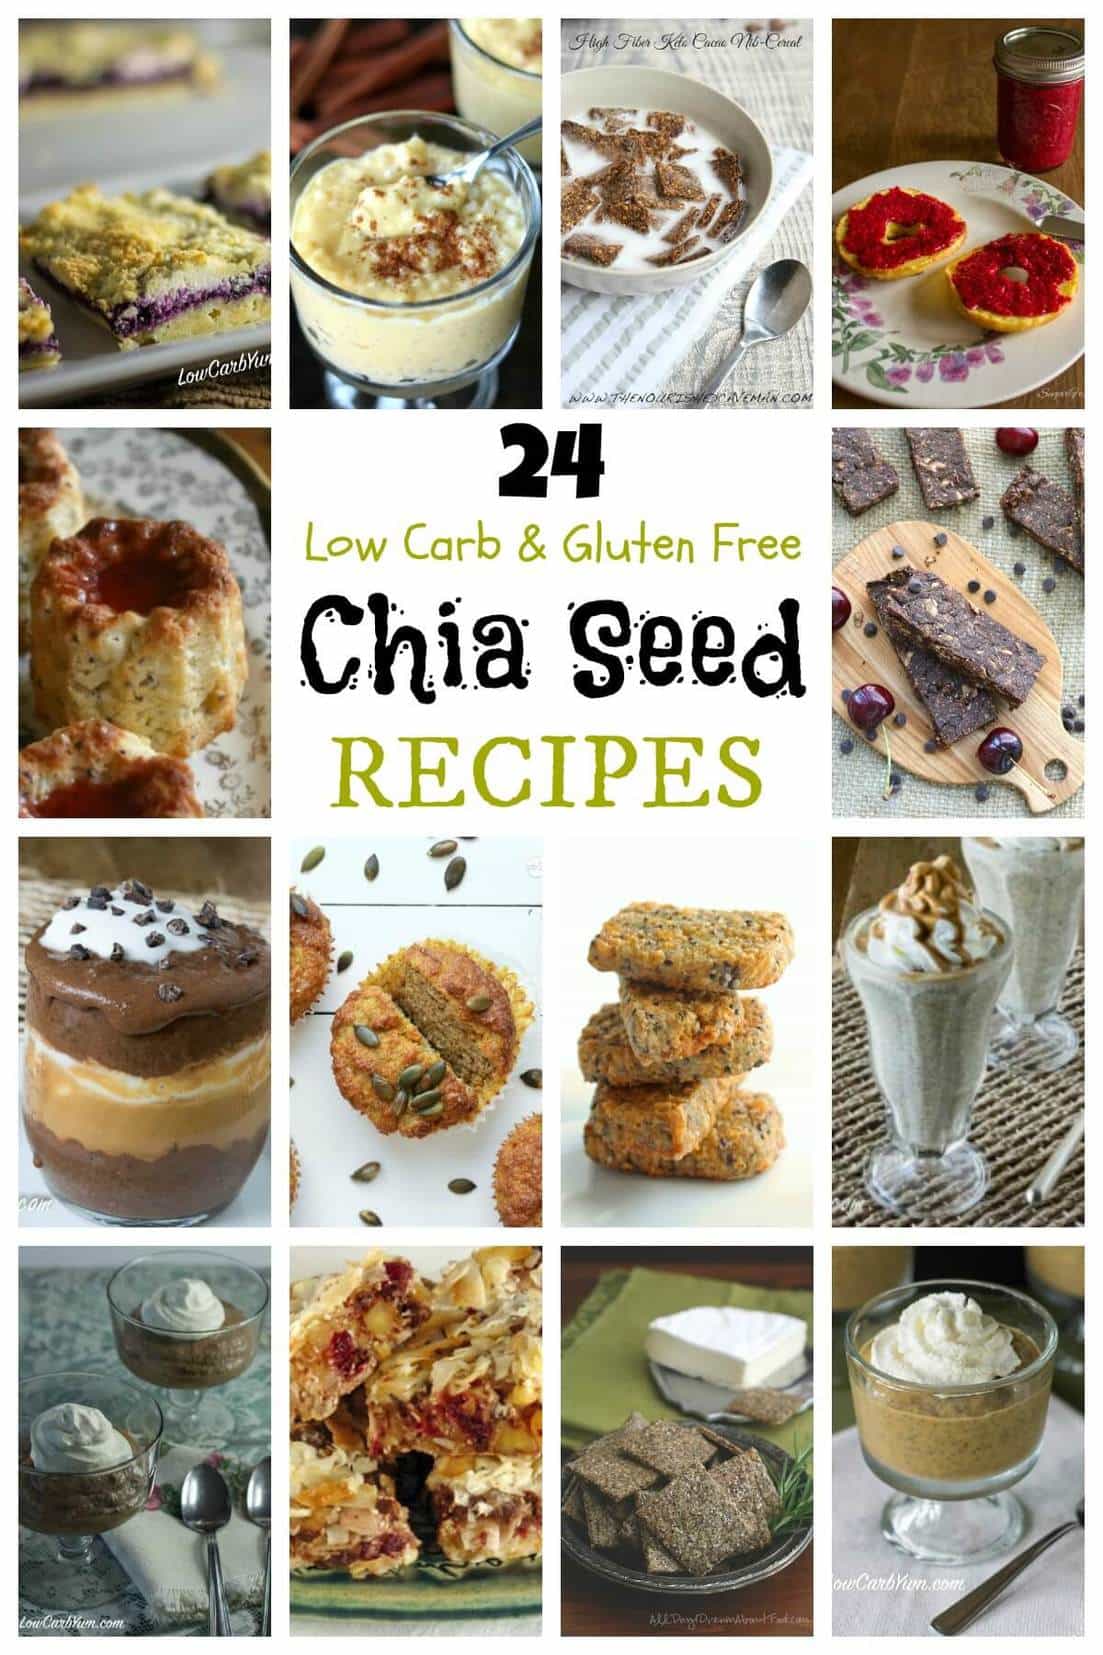 Top 5 Chia Seed Health Benefits and Recipes.